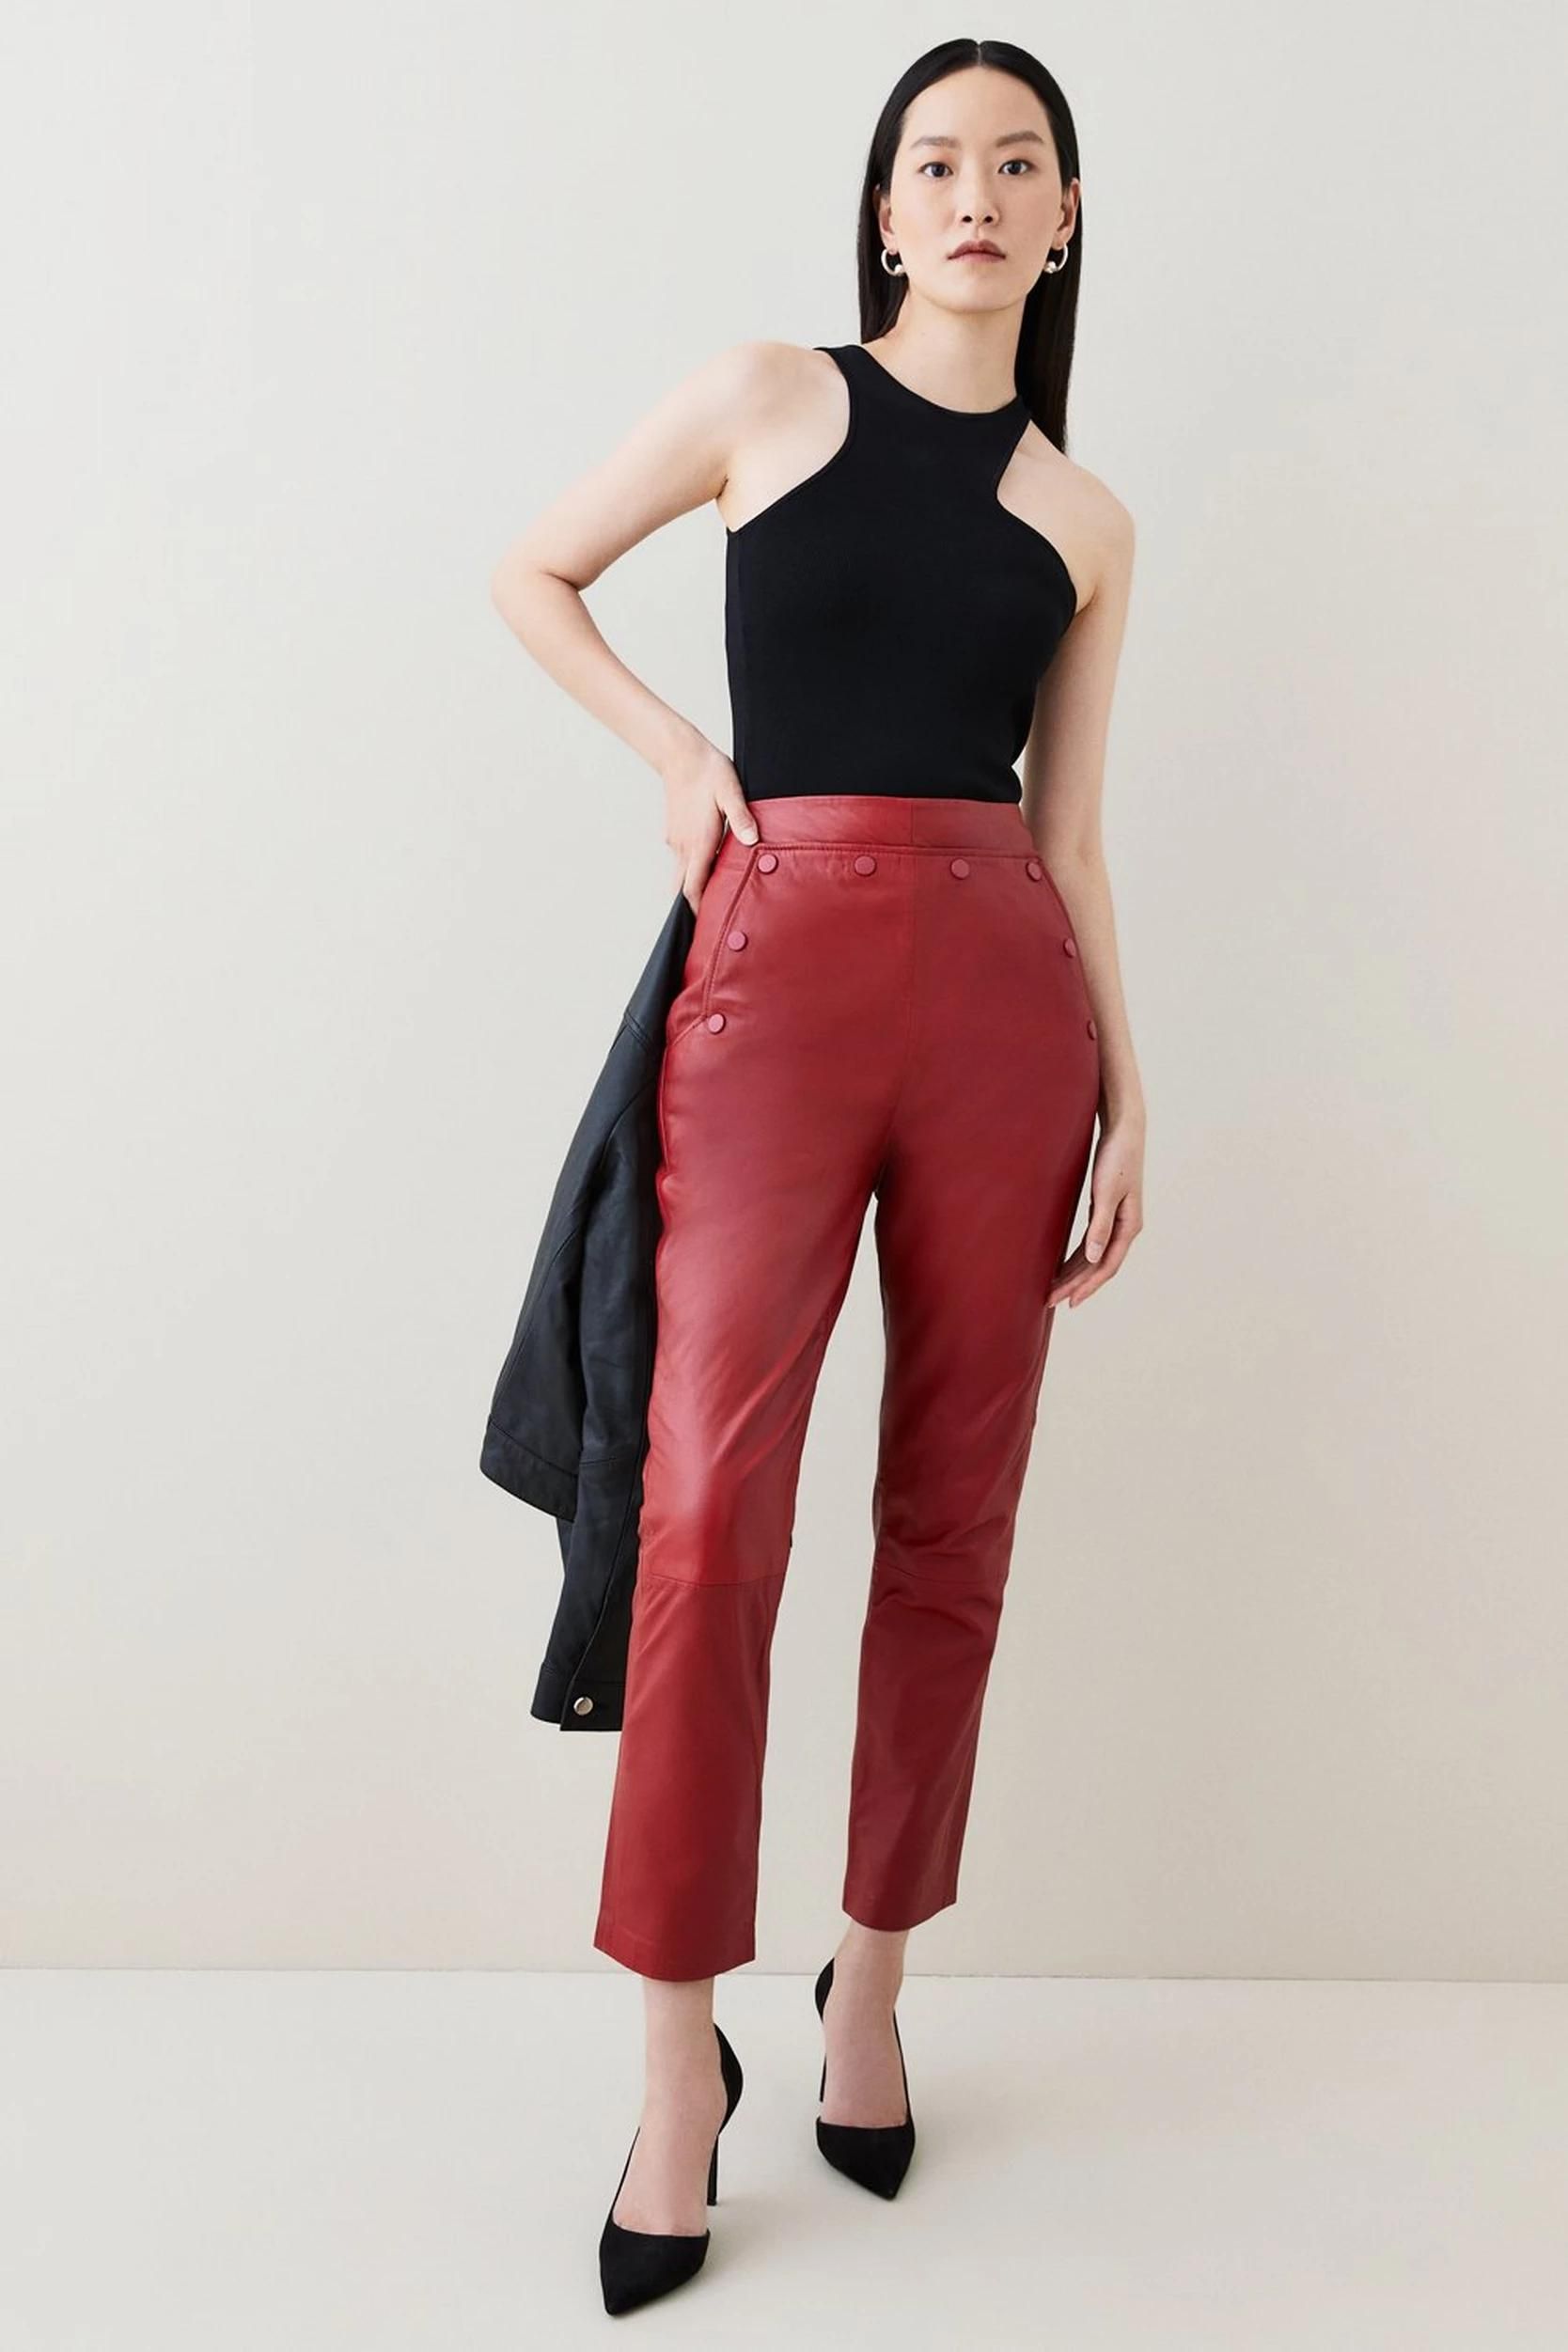 Clothing  Trousers  Mistress Rocks Unconditional Red Vegan Leather  Trousers